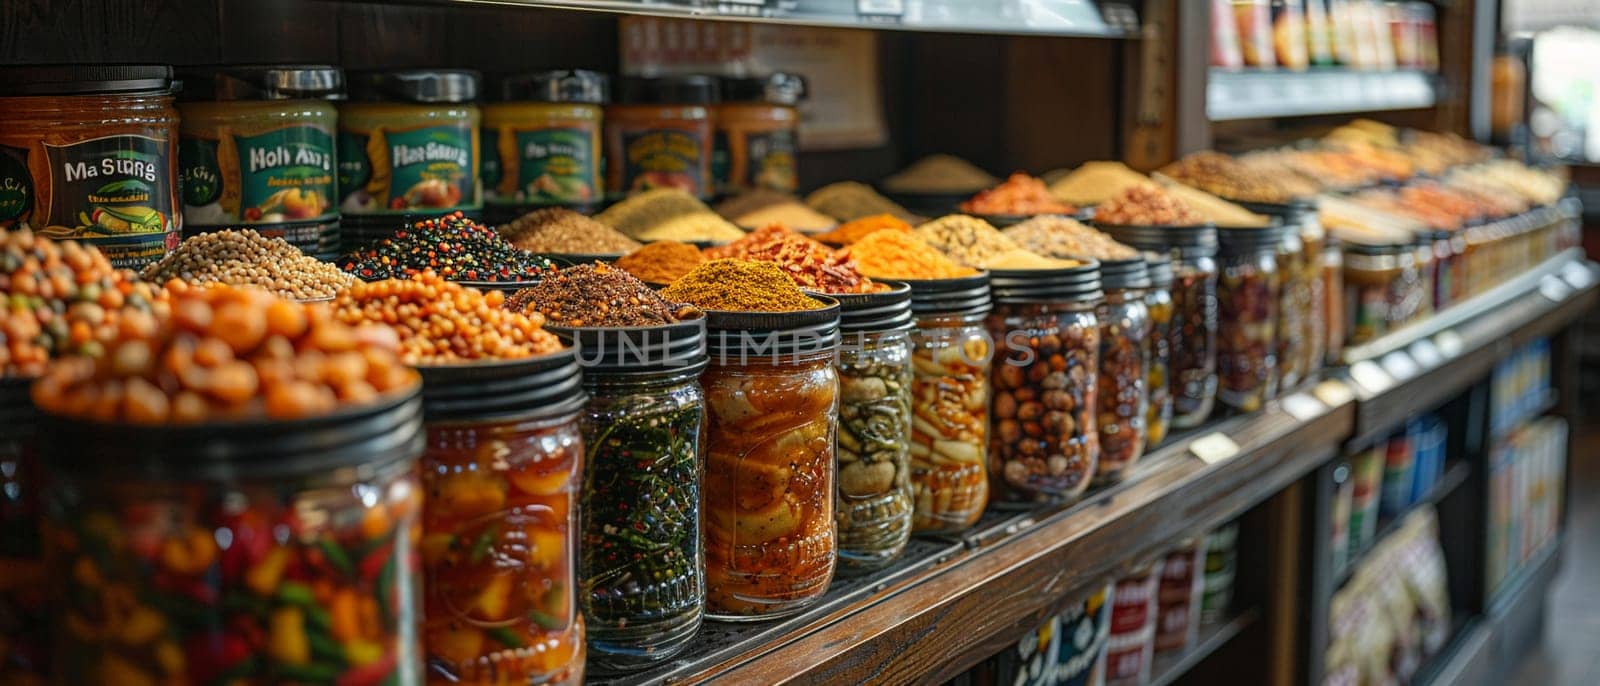 Ethnic Grocery Aisles Share Culture in Business of World Cuisines, Spices and labels stack up a story of diversity and flavor in the global business market.